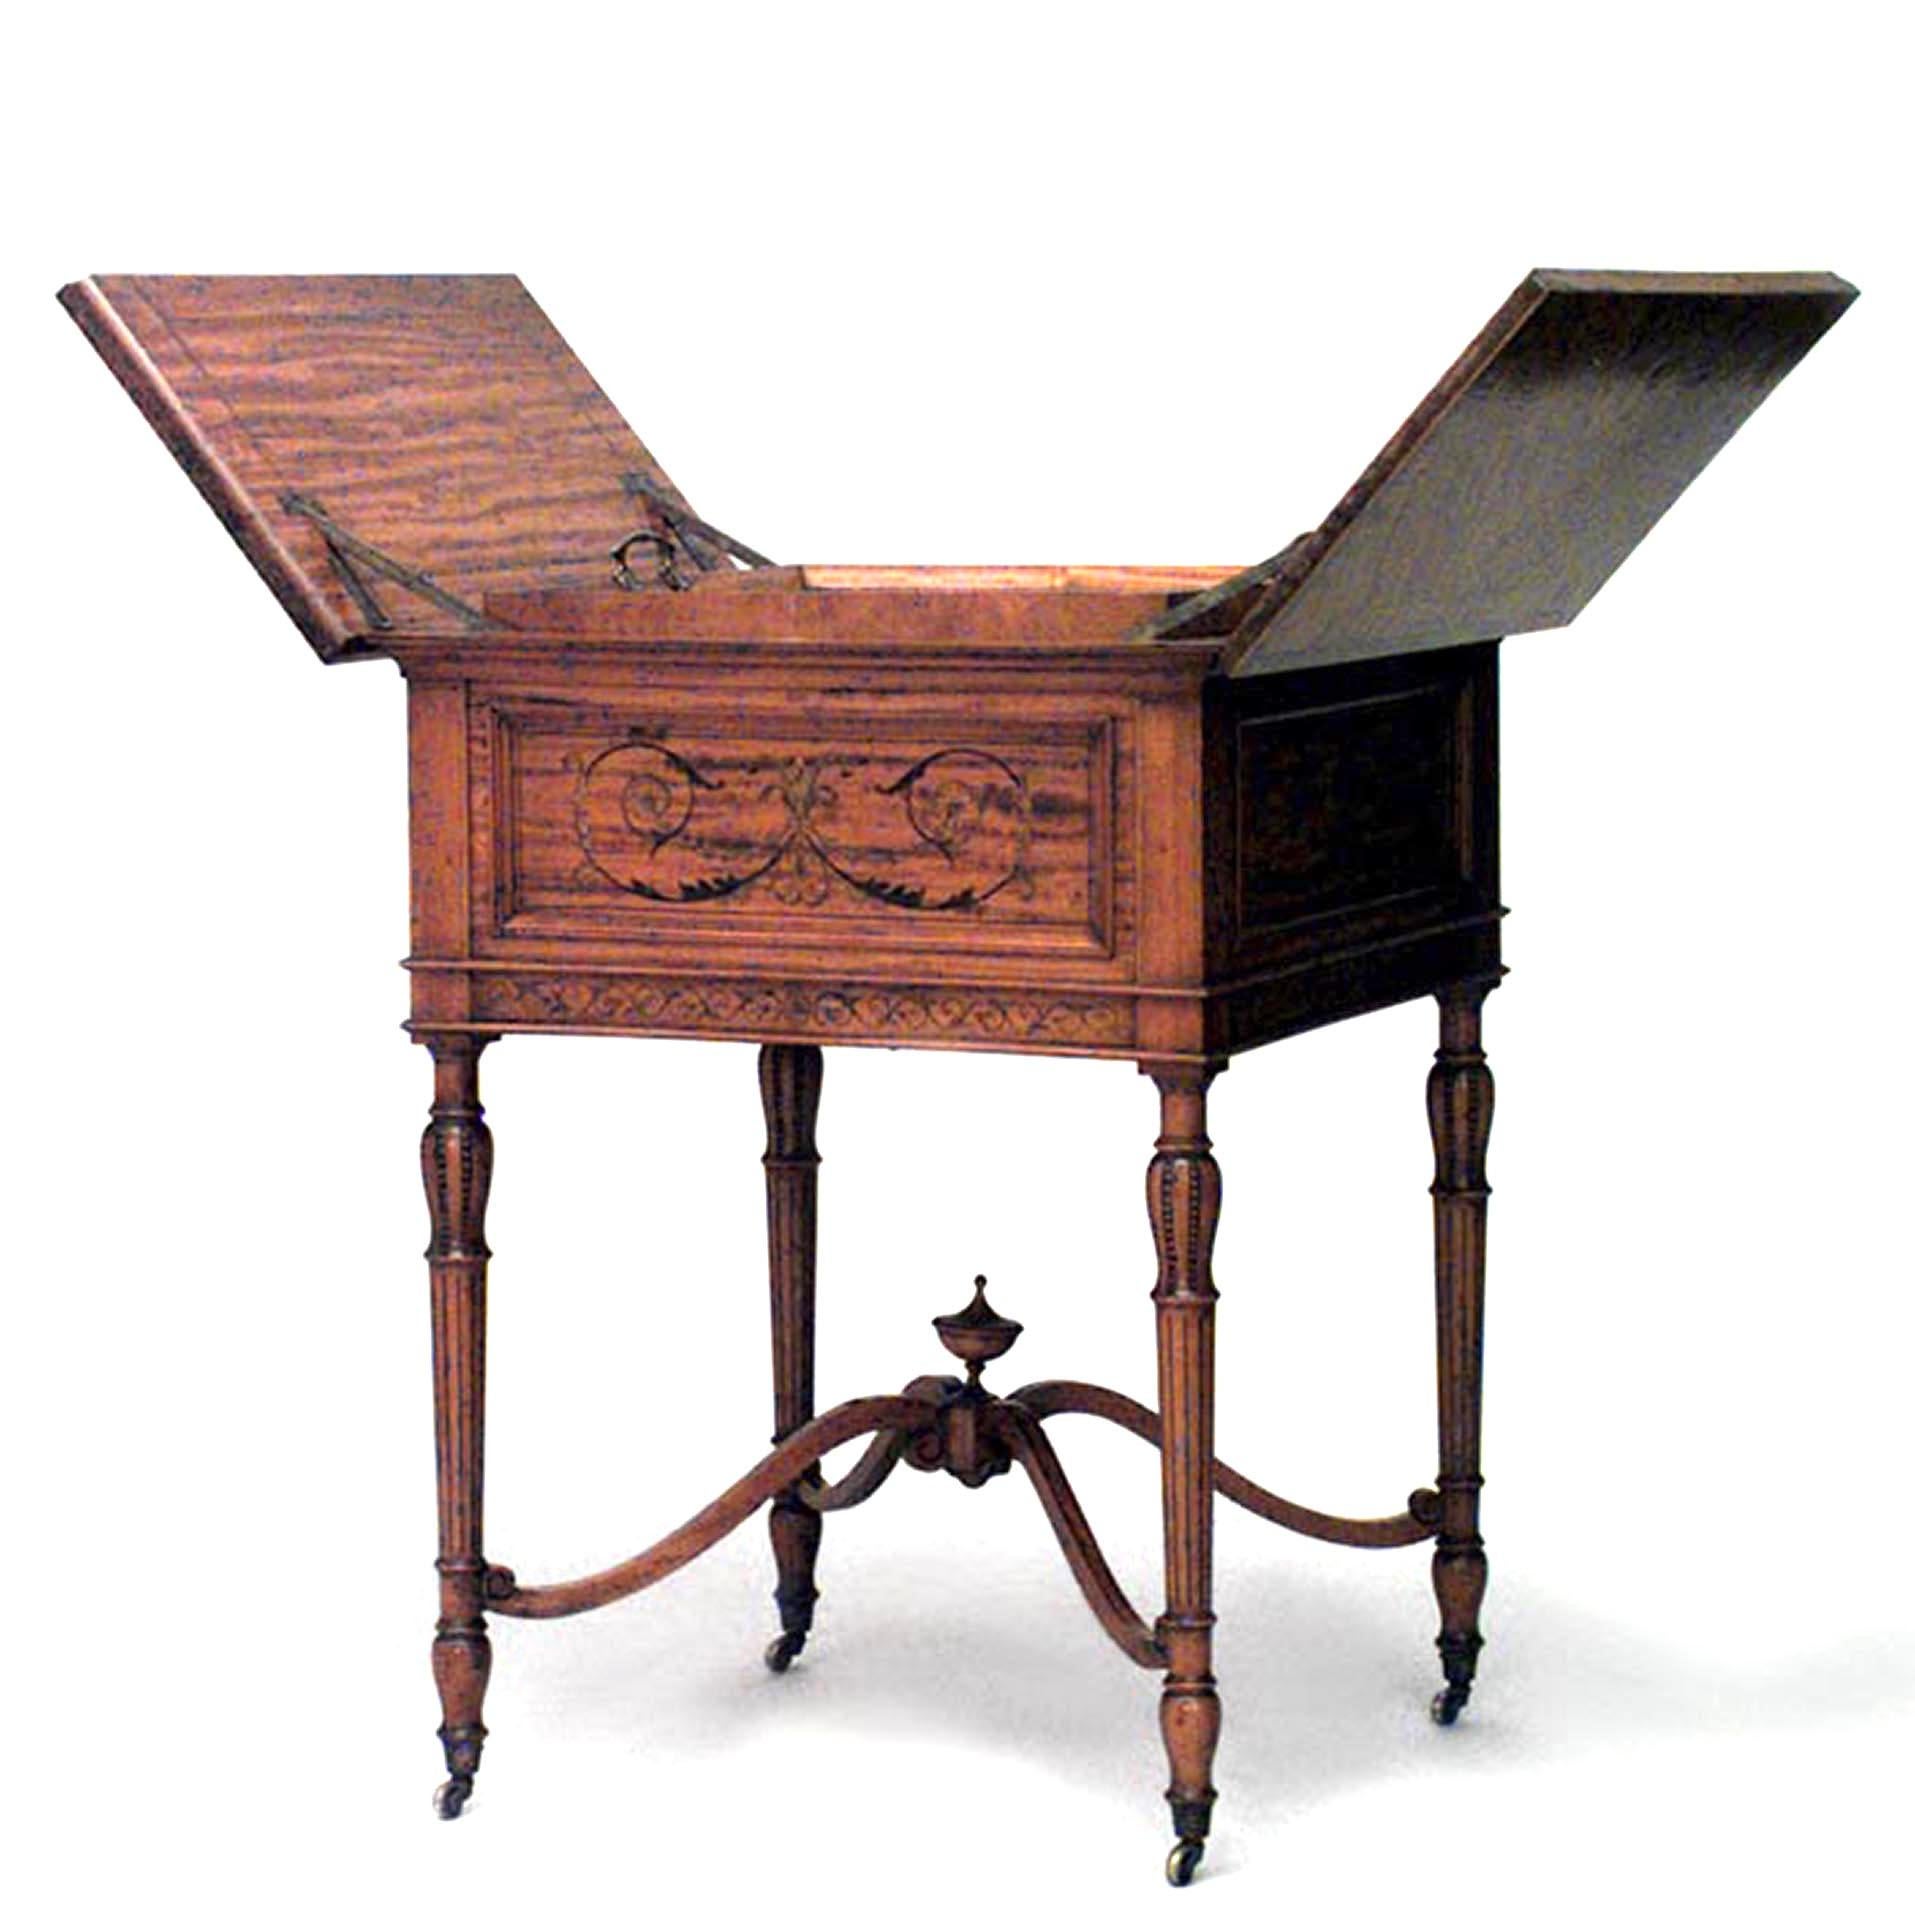 English Sheraton-style (19th Century) square satinwood and inlaid cellarette end table with mechanical folding top revealing a square tray and finial stretcher.
